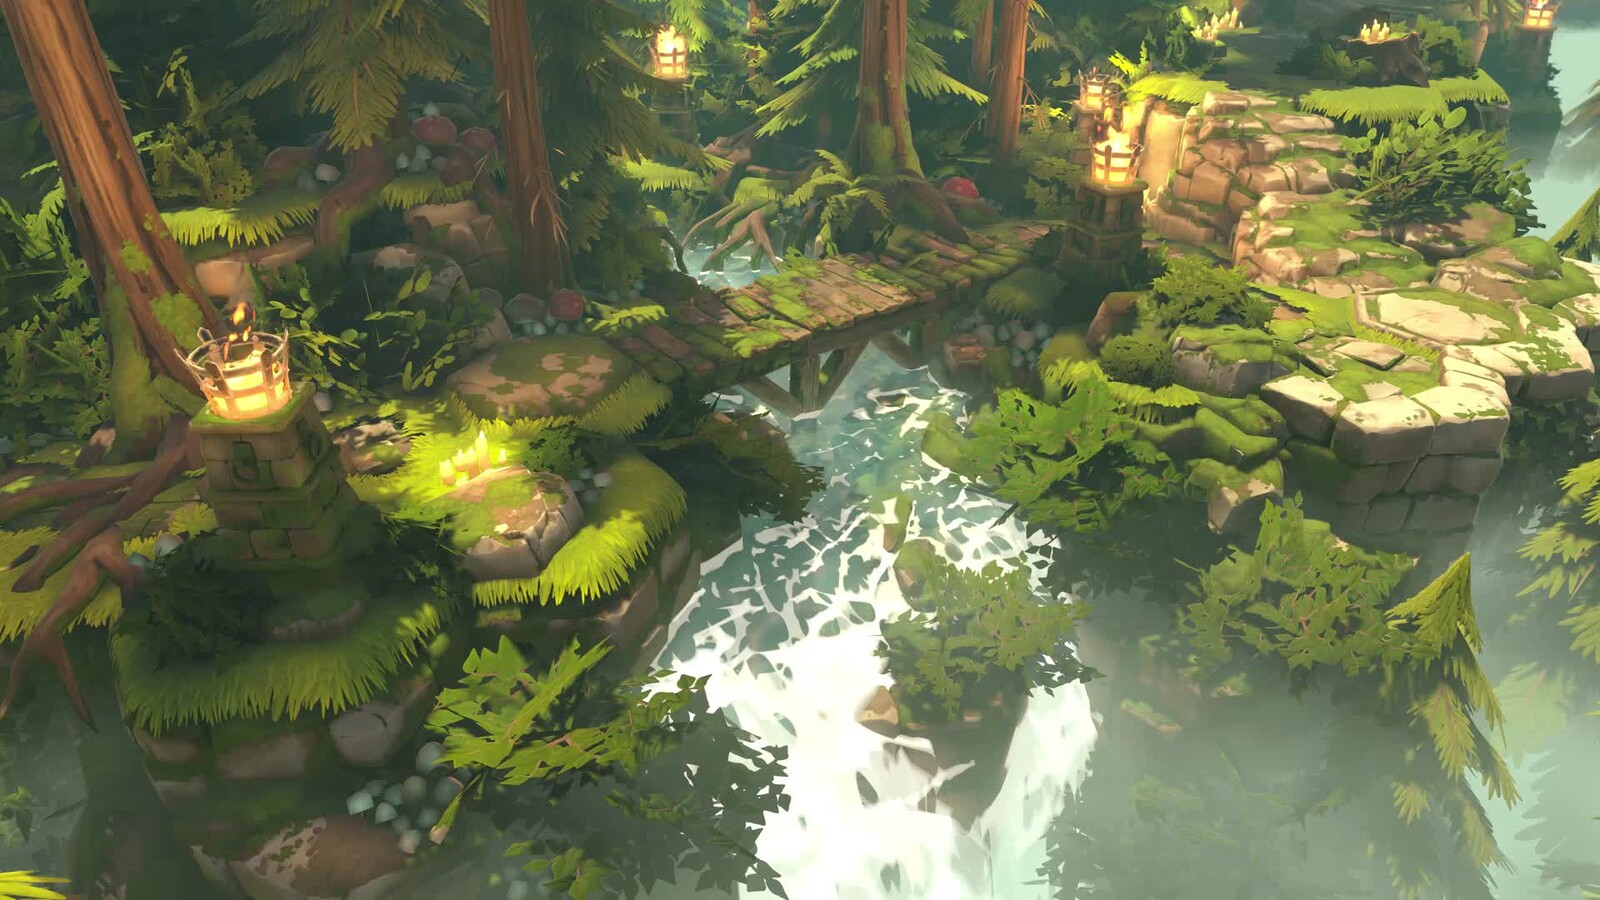 Stylized Water Shader for Unity - HexTile: Nature Pack